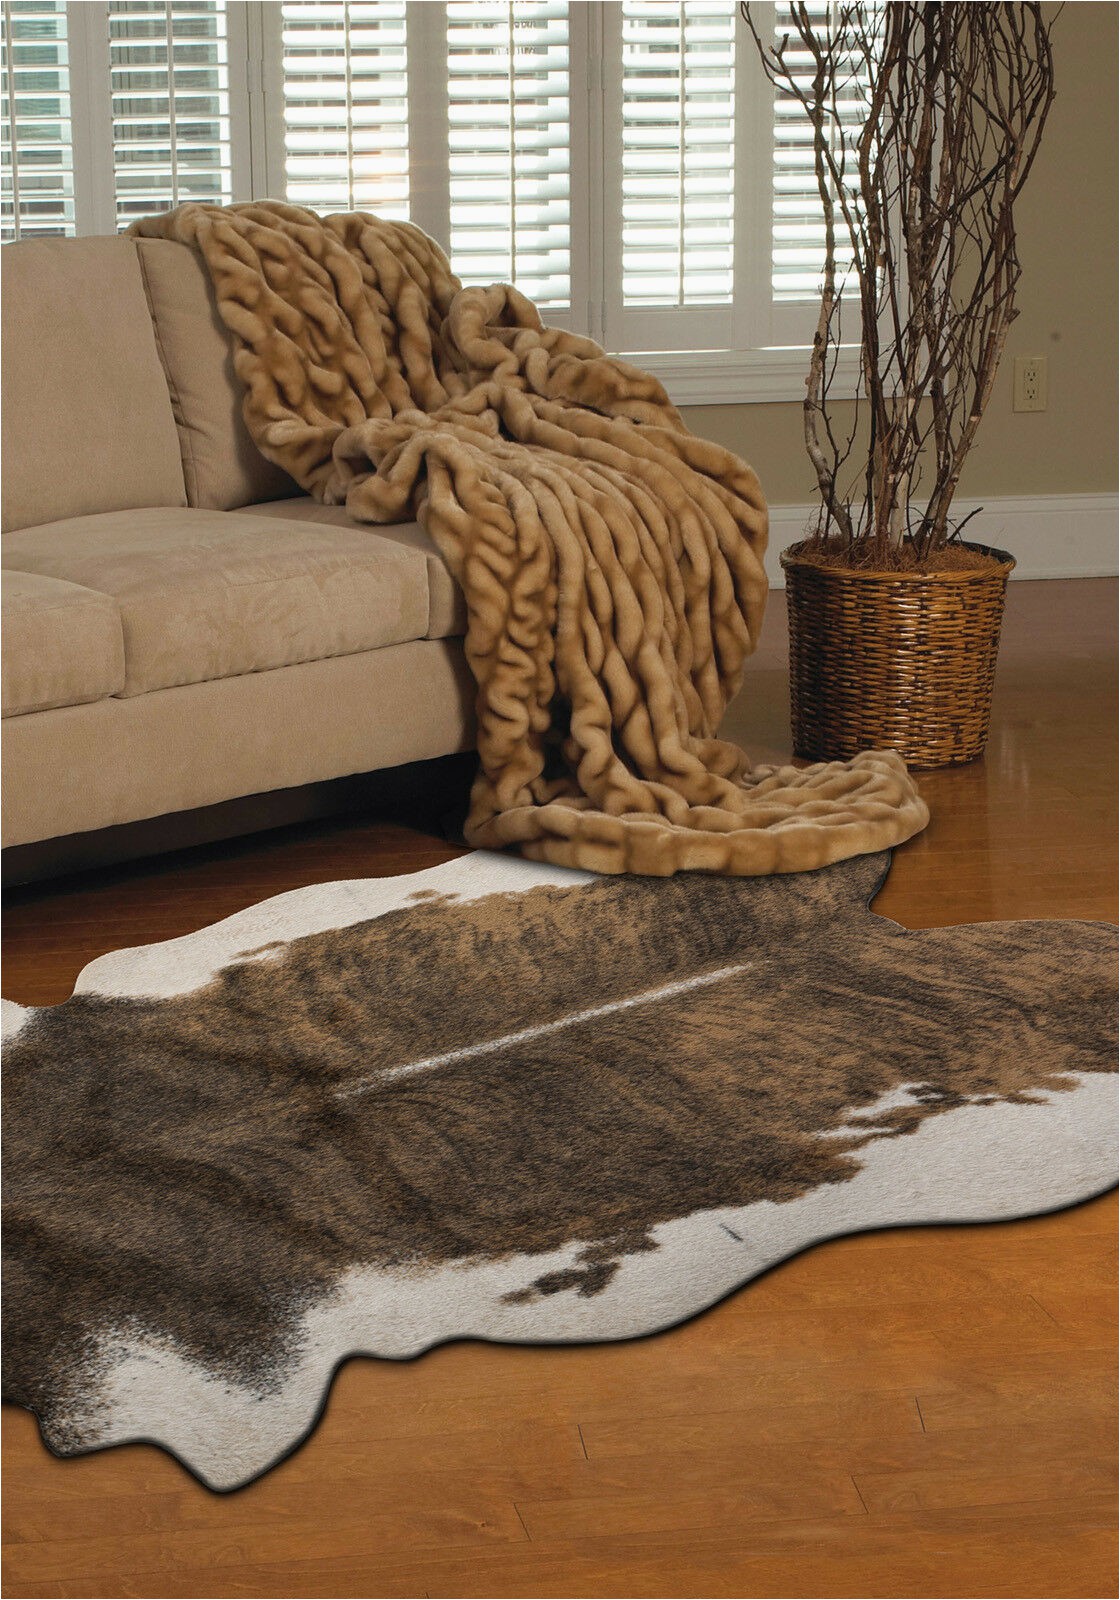 Faux Animal Skin area Rugs Clearance Cabin Country Faux Cow Hide Rug Cowhide Floor Rug Mat 152x198cm Tan